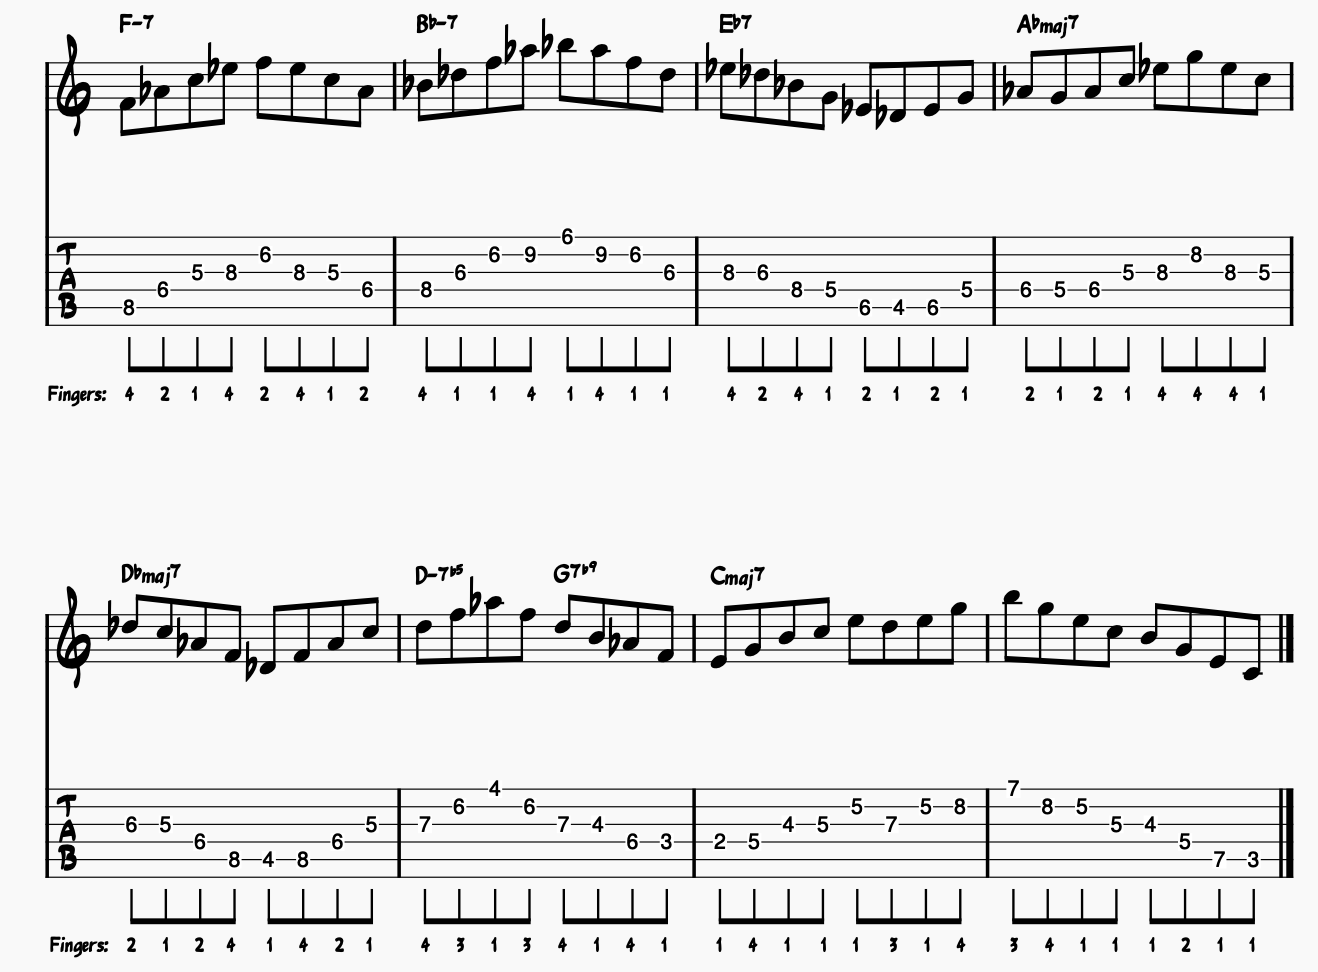 Arpeggio patterns through the first eight measures of All the Things You Are